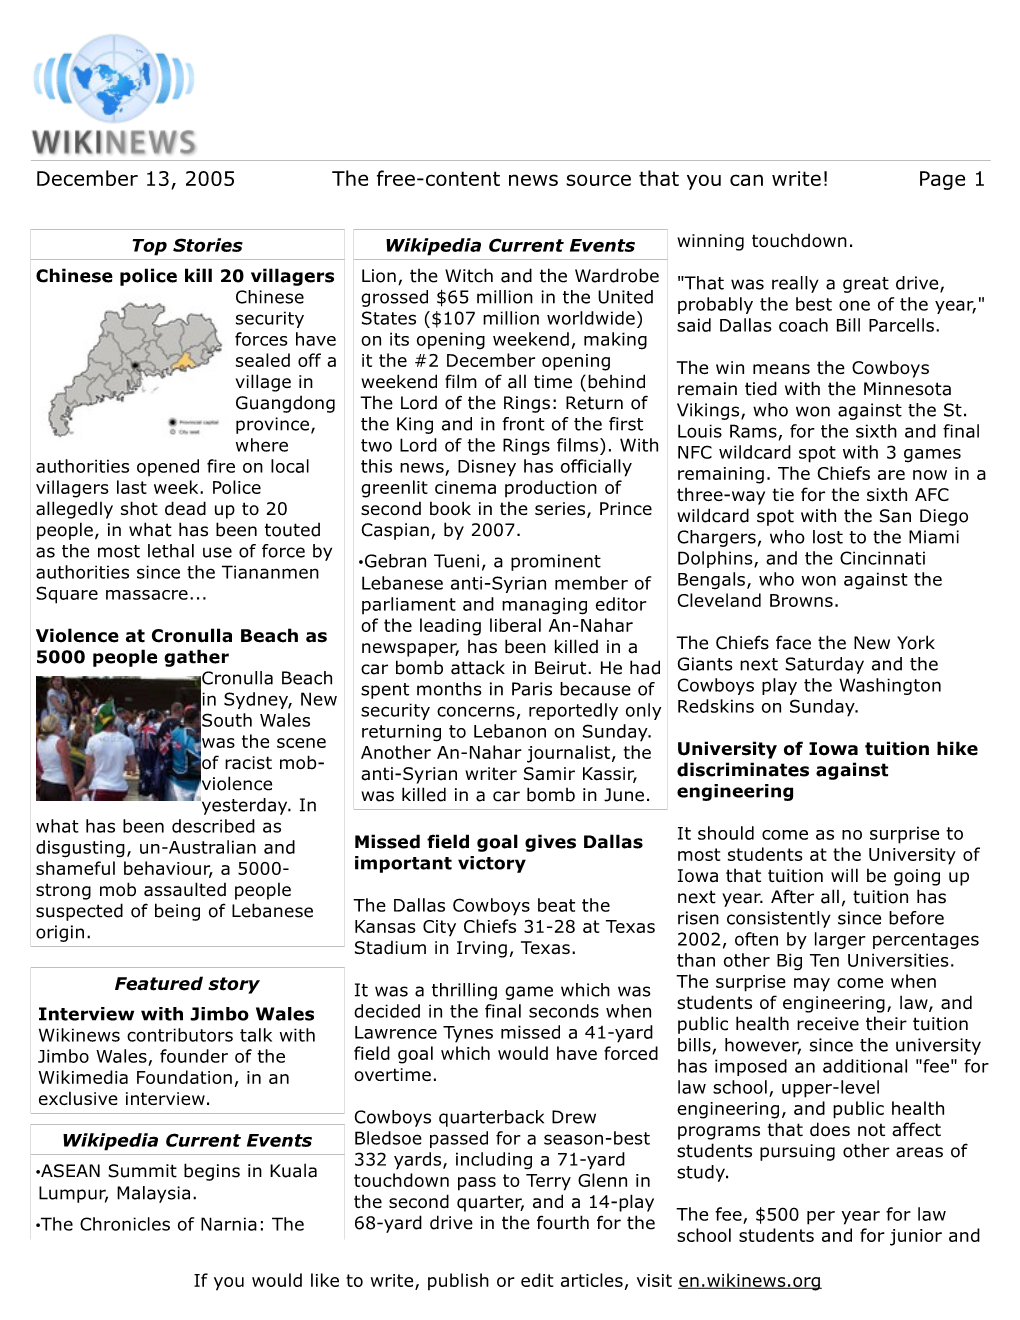 December 13, 2005 the Free-Content News Source That You Can Write! Page 1